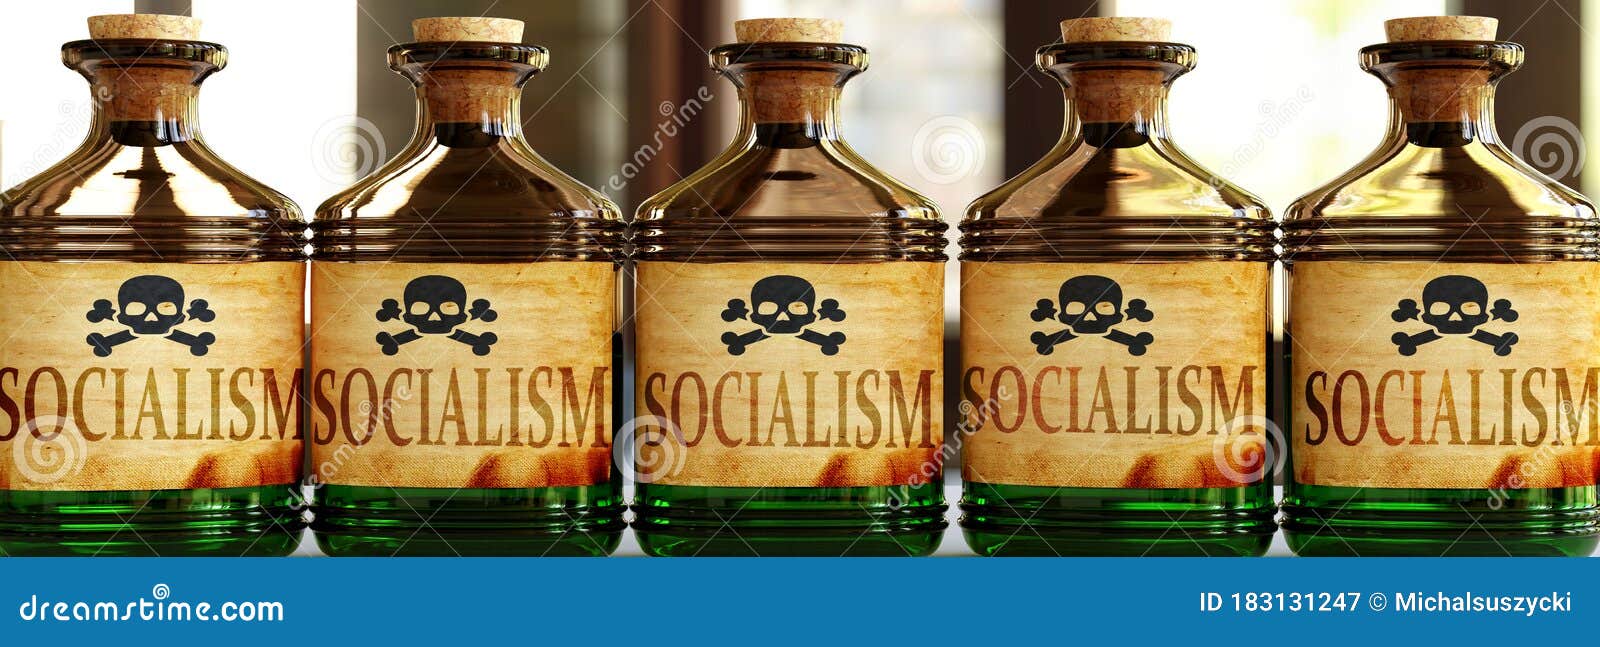 socialism can be like a deadly poison - pictured as word socialism on toxic bottles to ize that socialism can be unhealthy